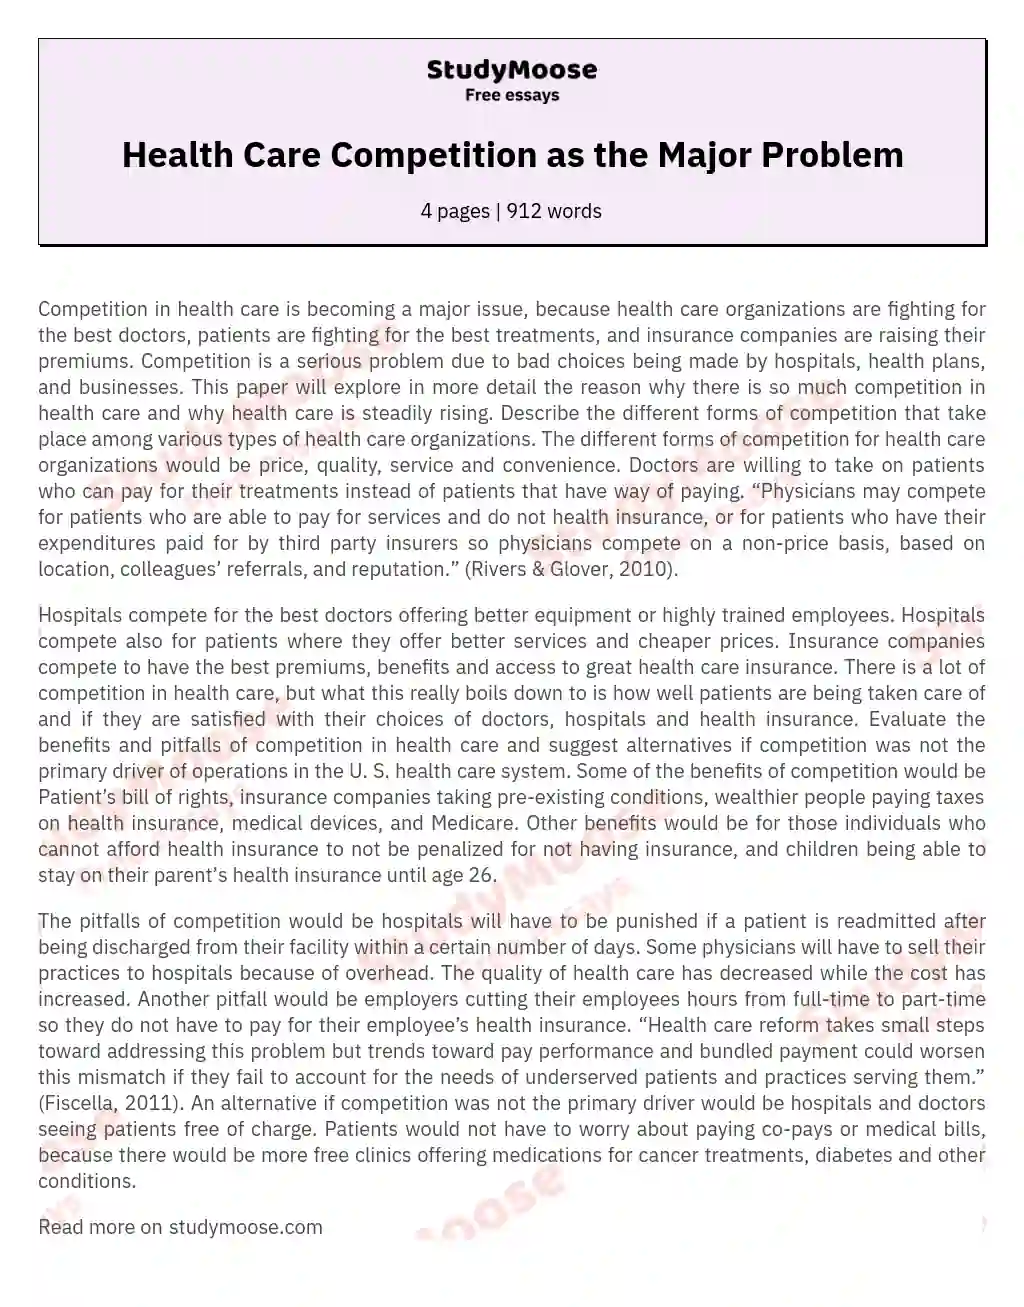 Health Care Competition as the Major Problem essay